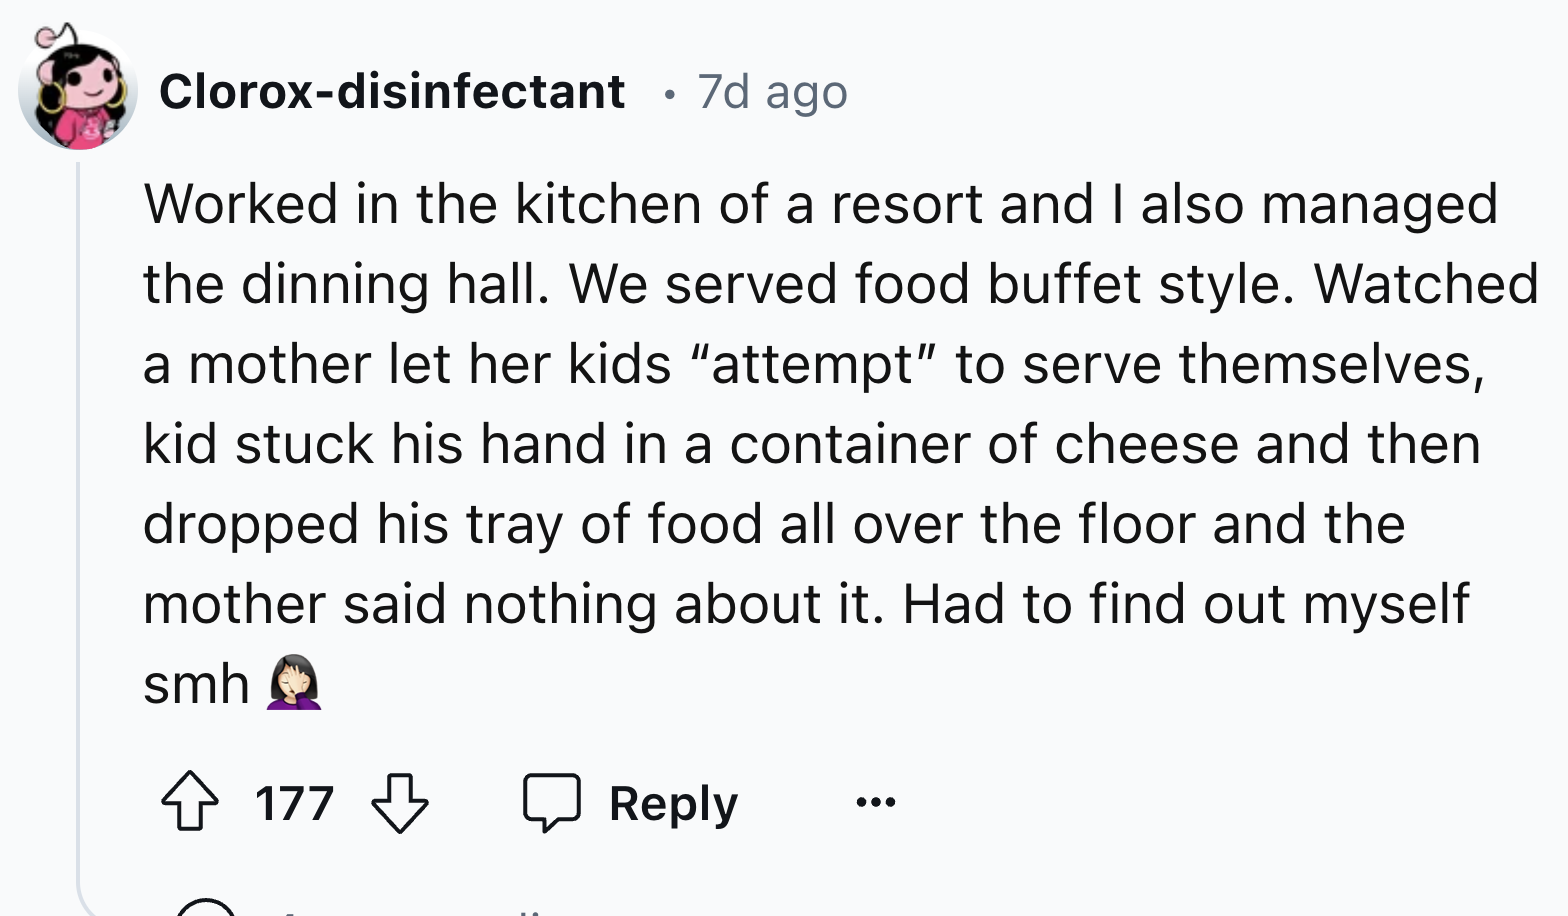 screenshot - Cloroxdisinfectant 7d ago Worked in the kitchen of a resort and I also managed the dinning hall. We served food buffet style. Watched a mother let her kids "attempt" to serve themselves, kid stuck his hand in a container of cheese and then dr